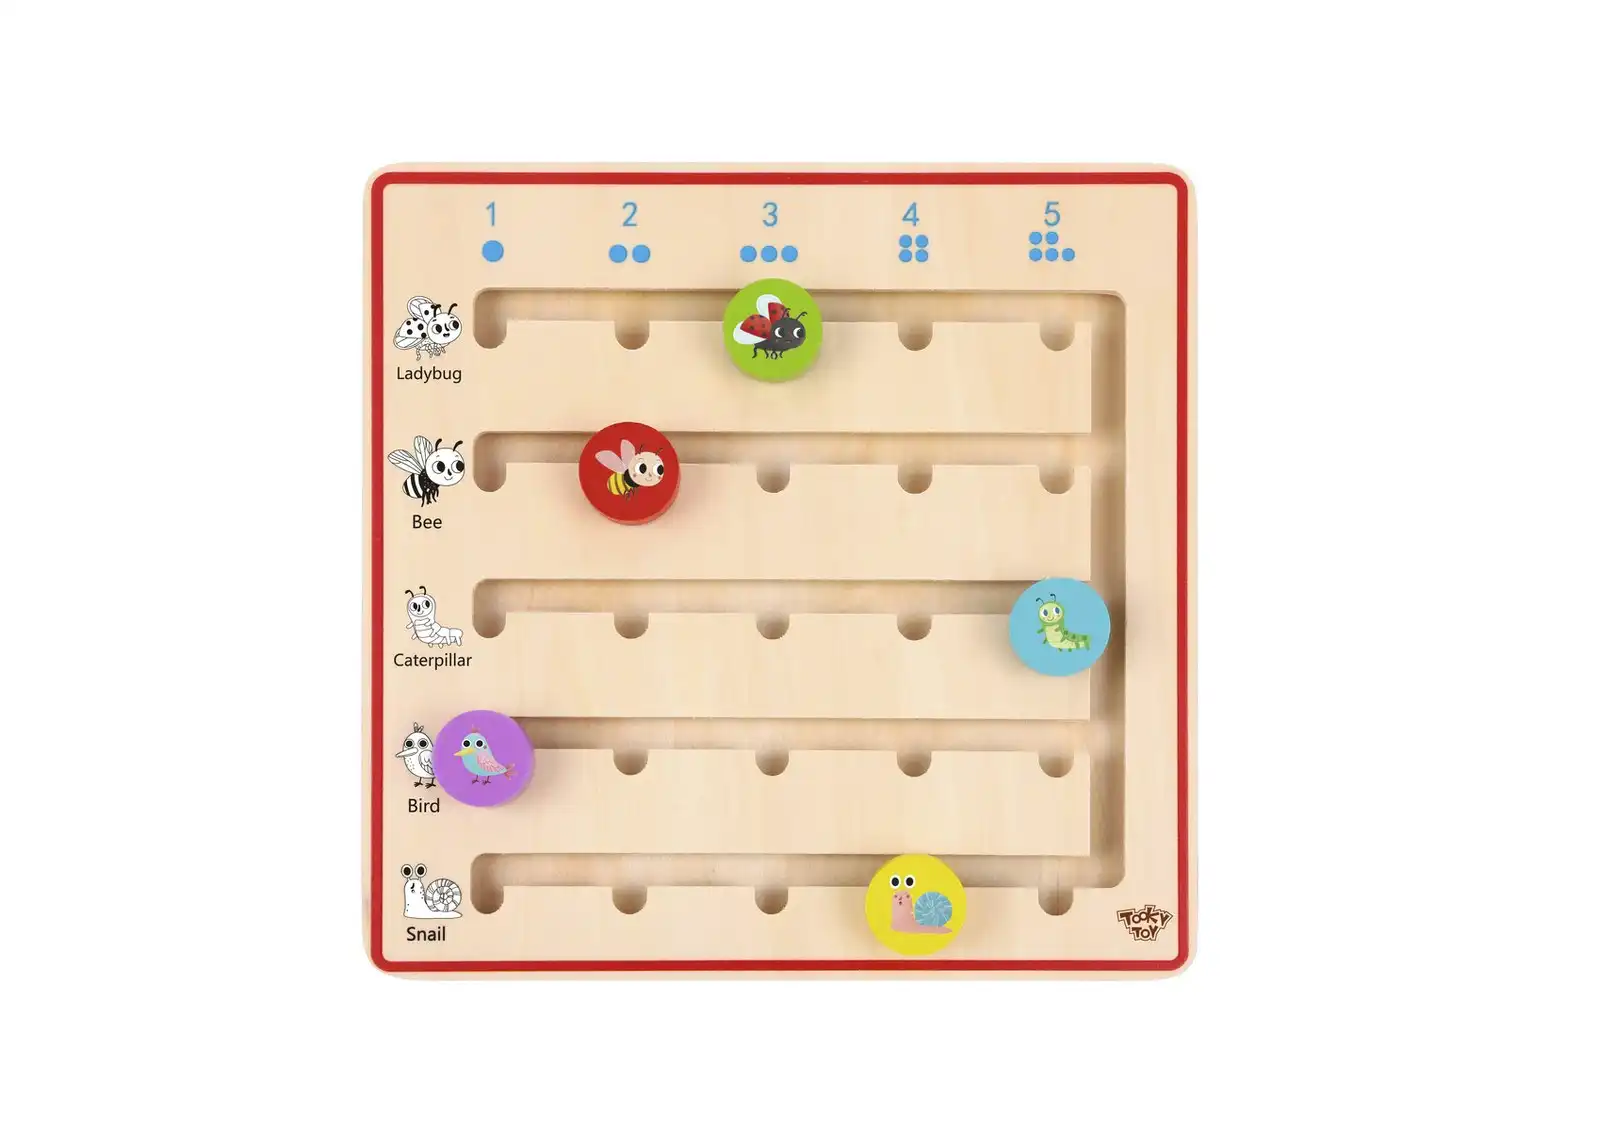 21pc Tooky Toy Wooden Counting Game Educational/Learning Activity Play Kids 3+